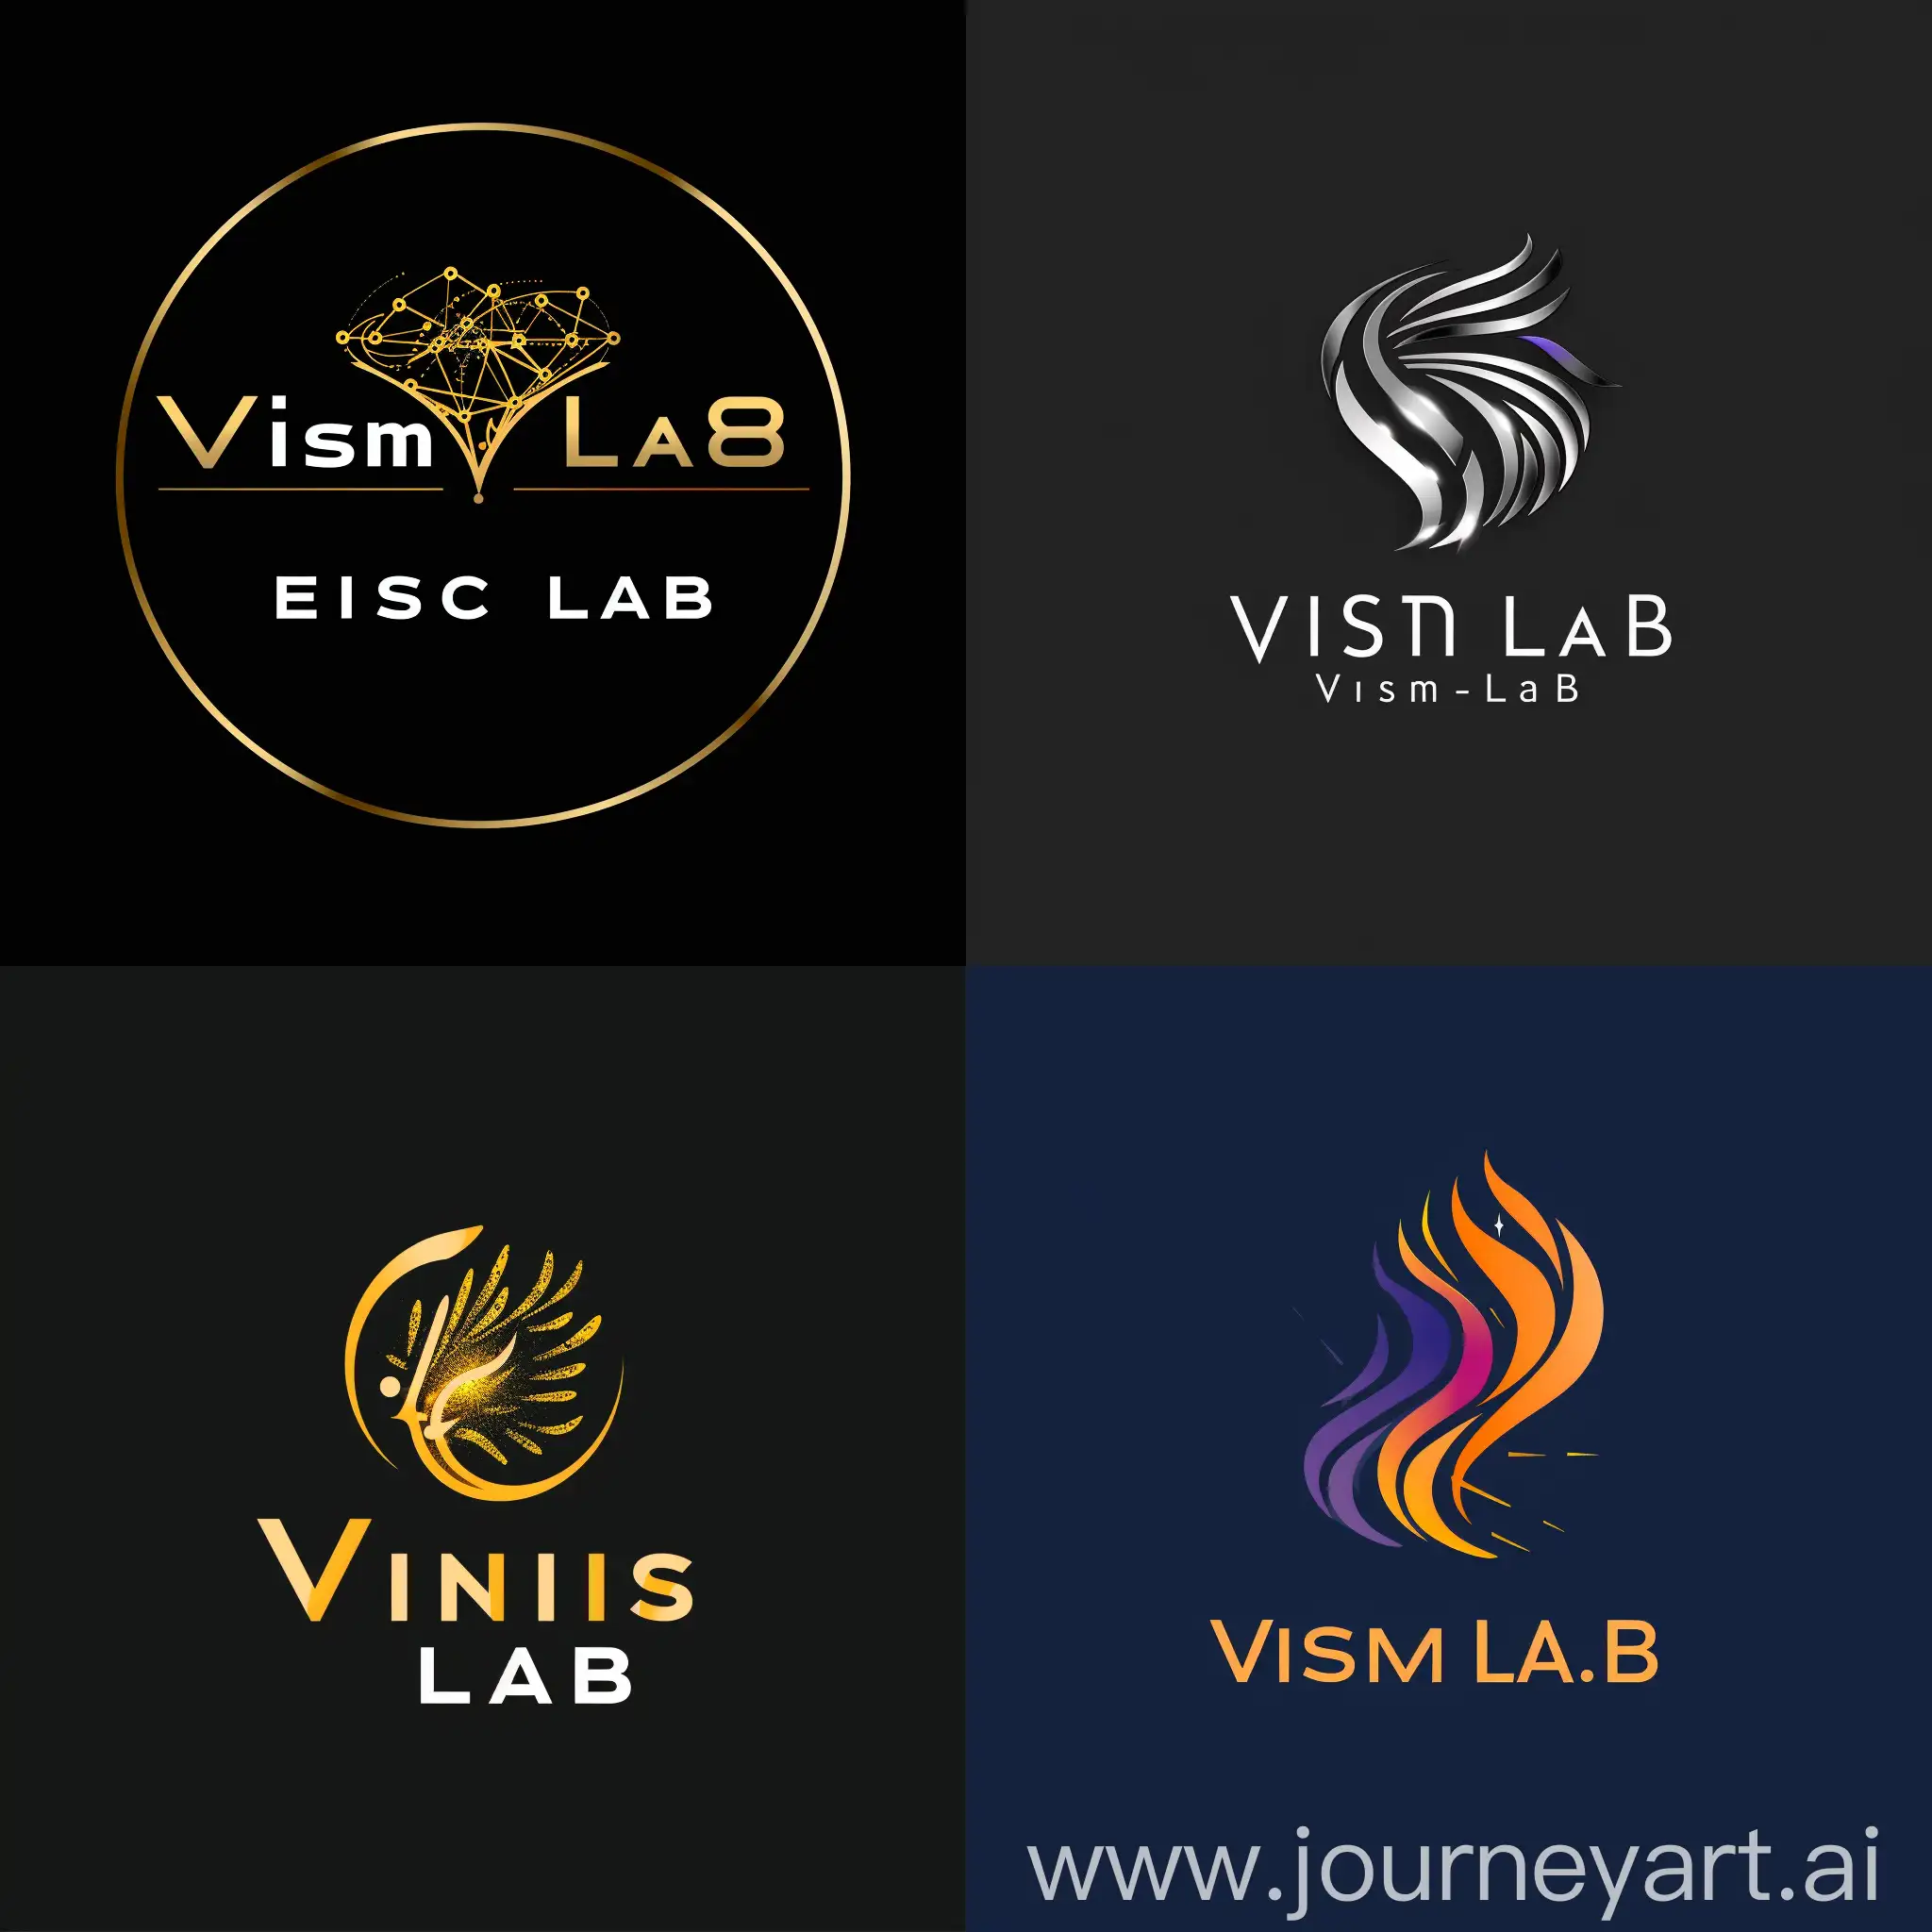 Vision-Lab-Aesthetic-Logo-Design-with-Symmetry-and-Minimalistic-Appeal